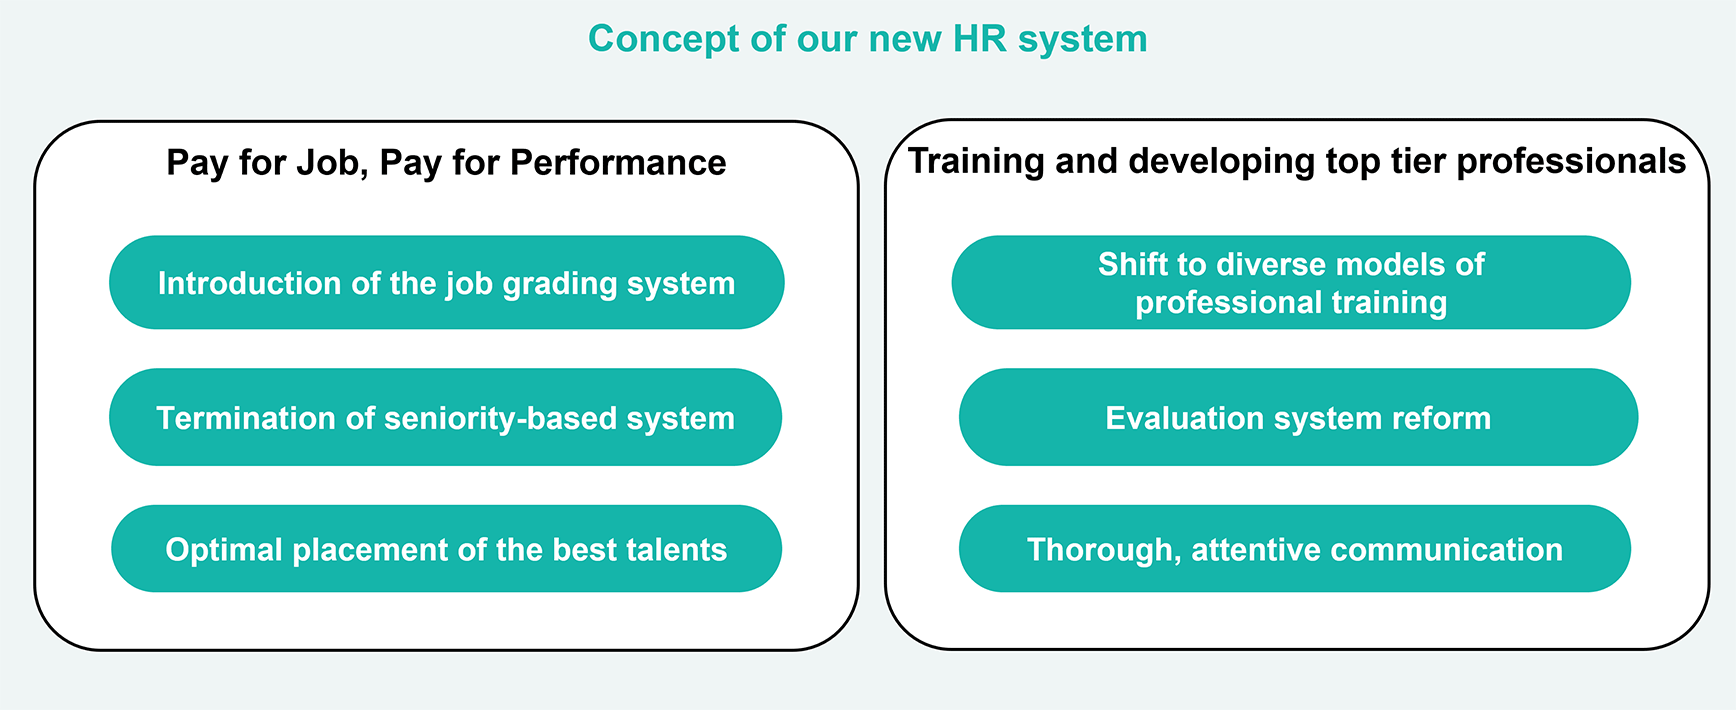 Concept of our new HR system